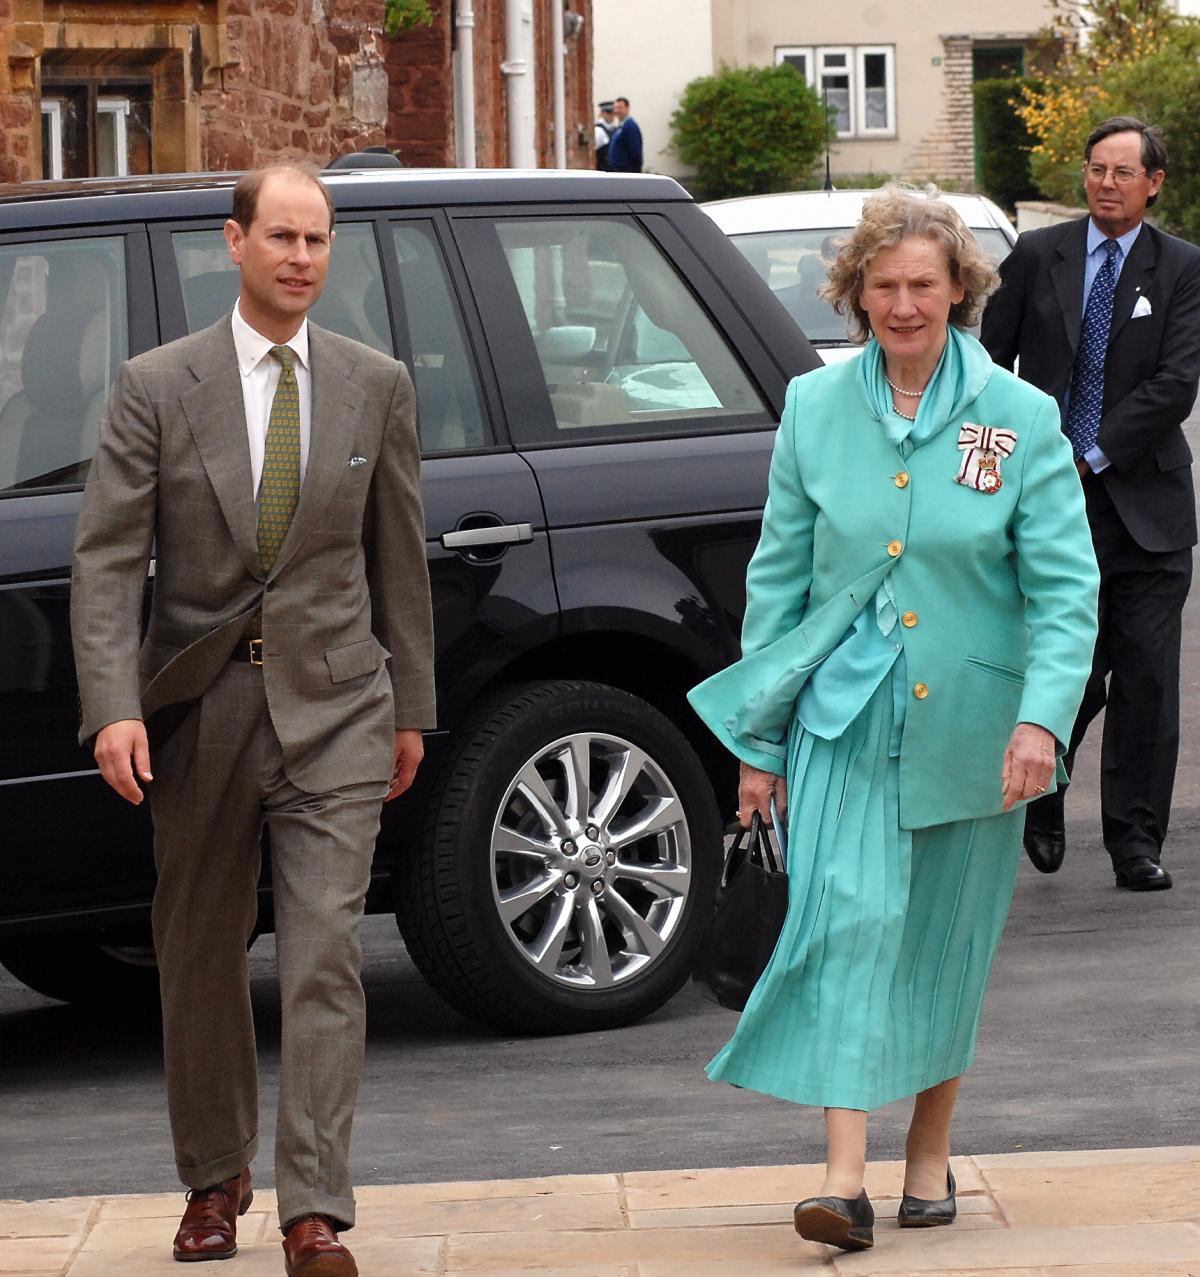 Prince Edward opens Bridgwater College's Walled Gardens of Cannington